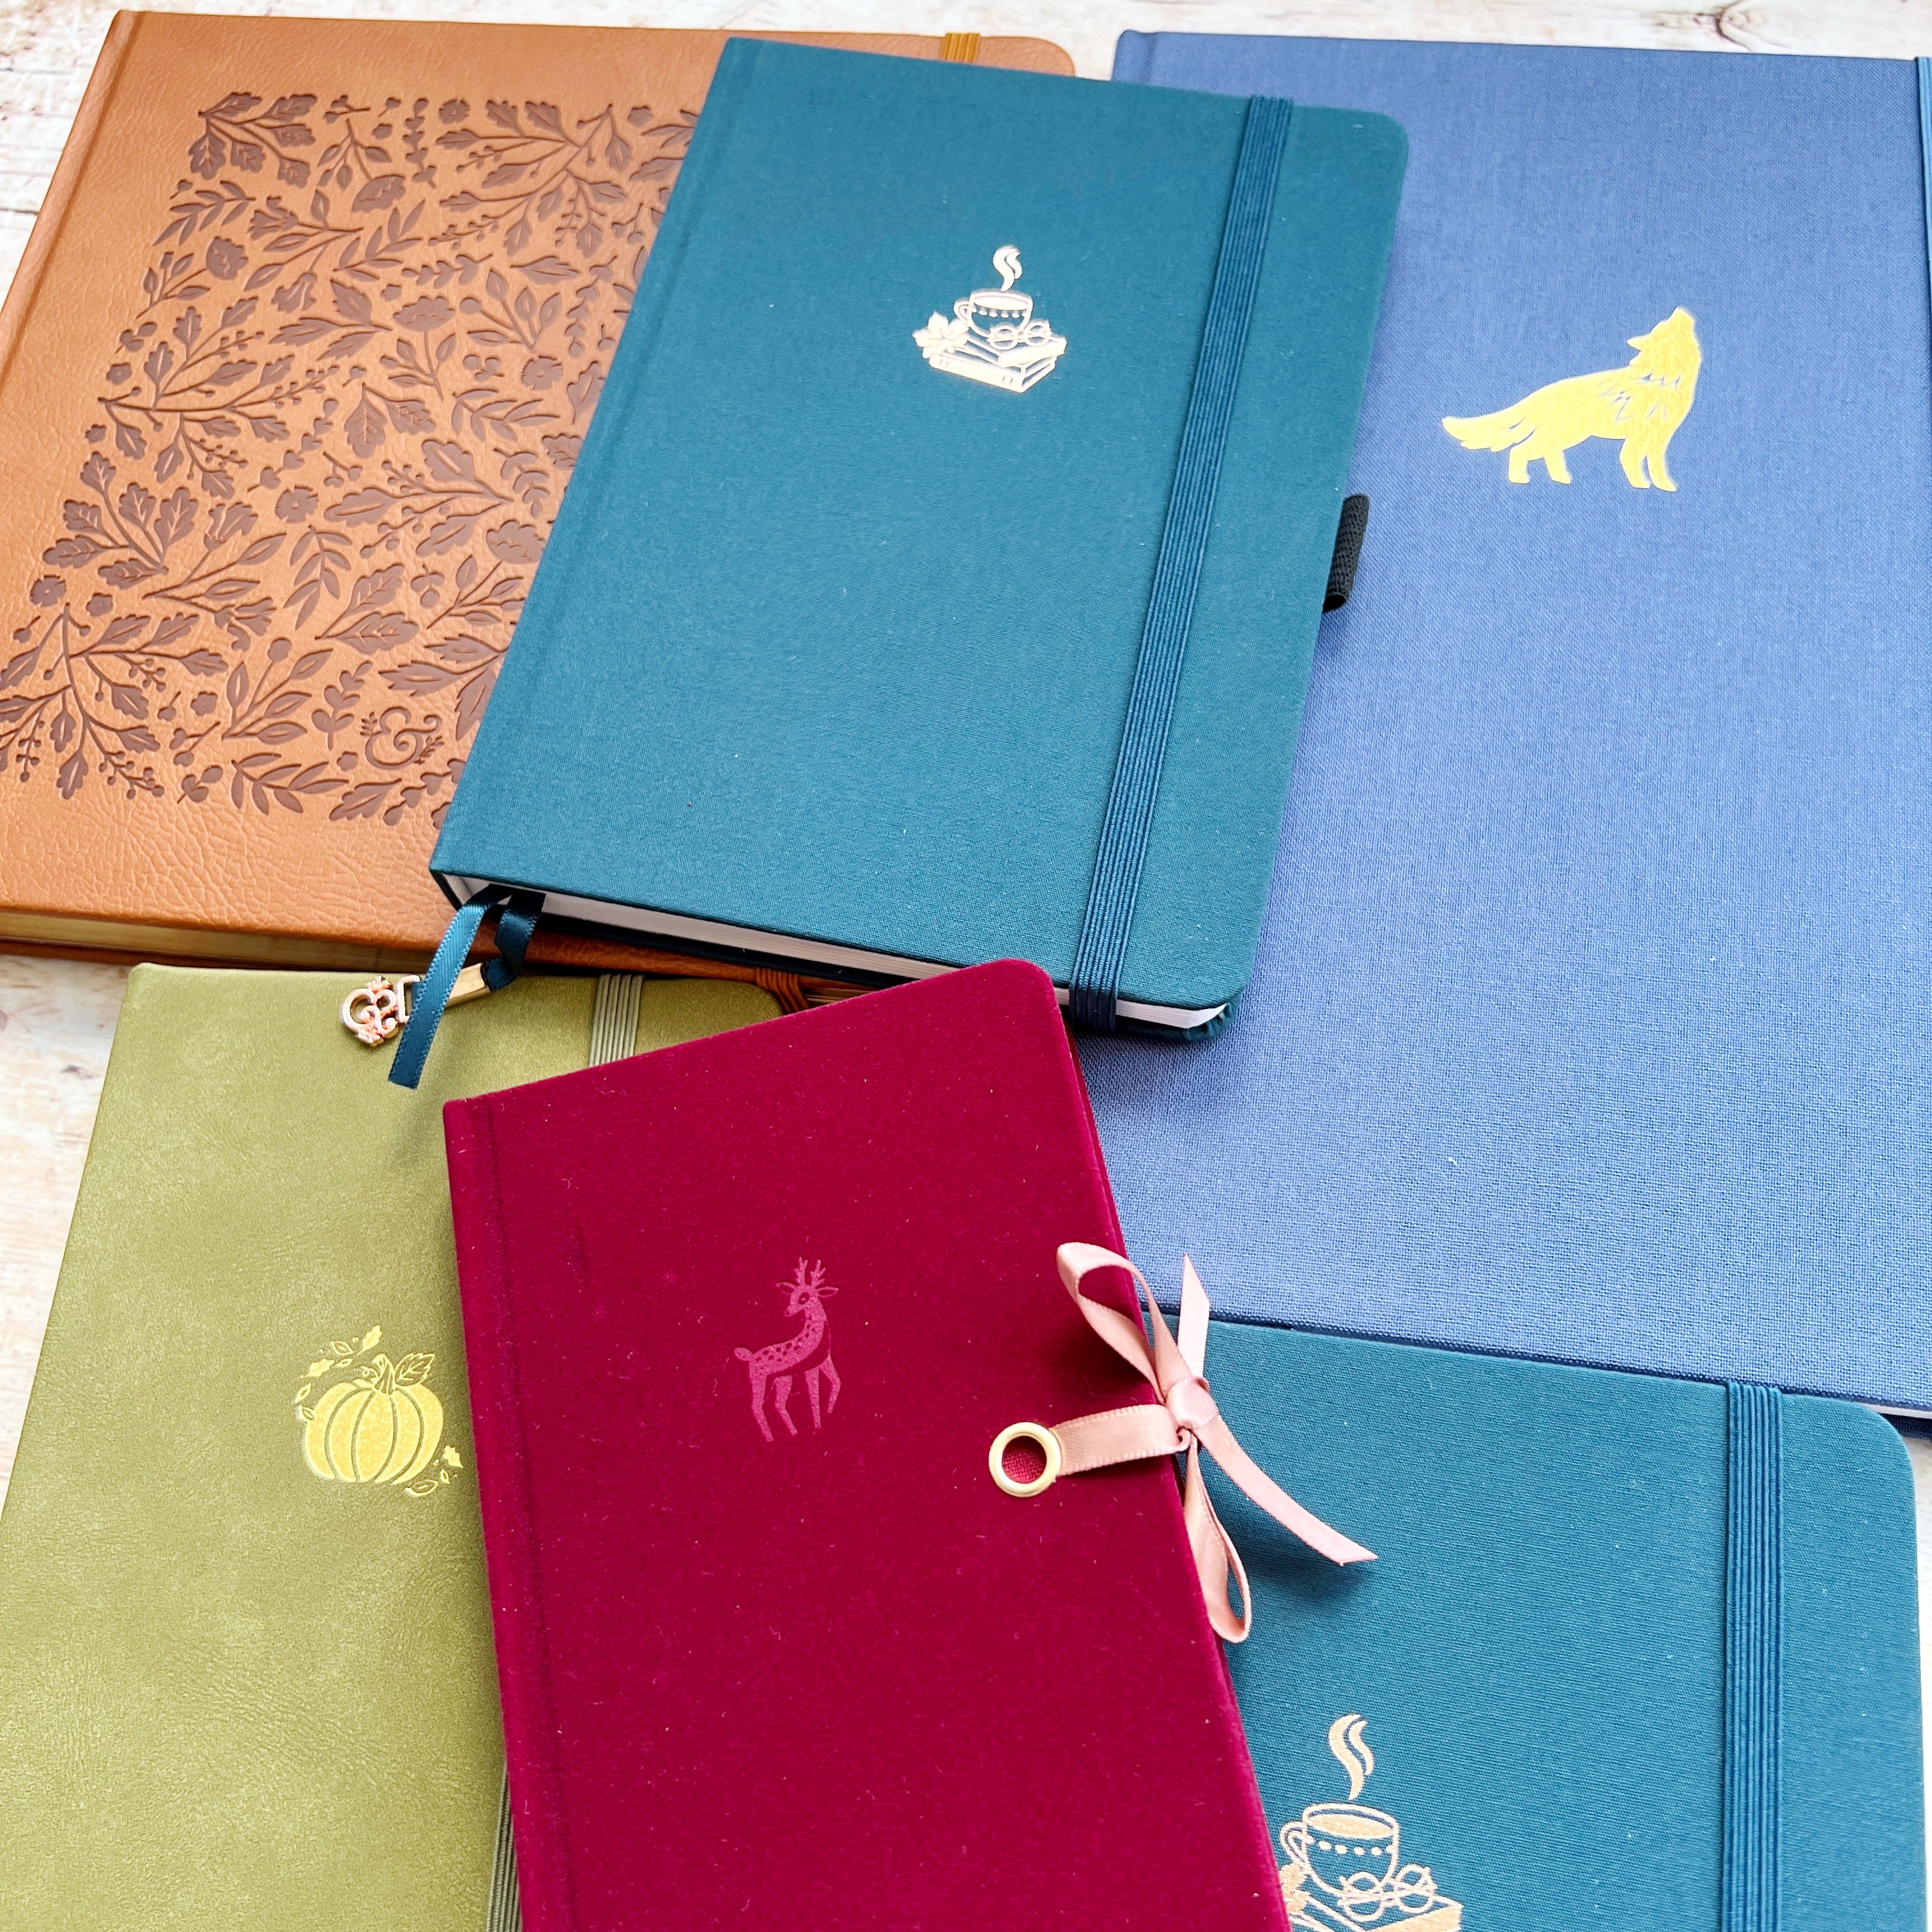 Different size journals laid out